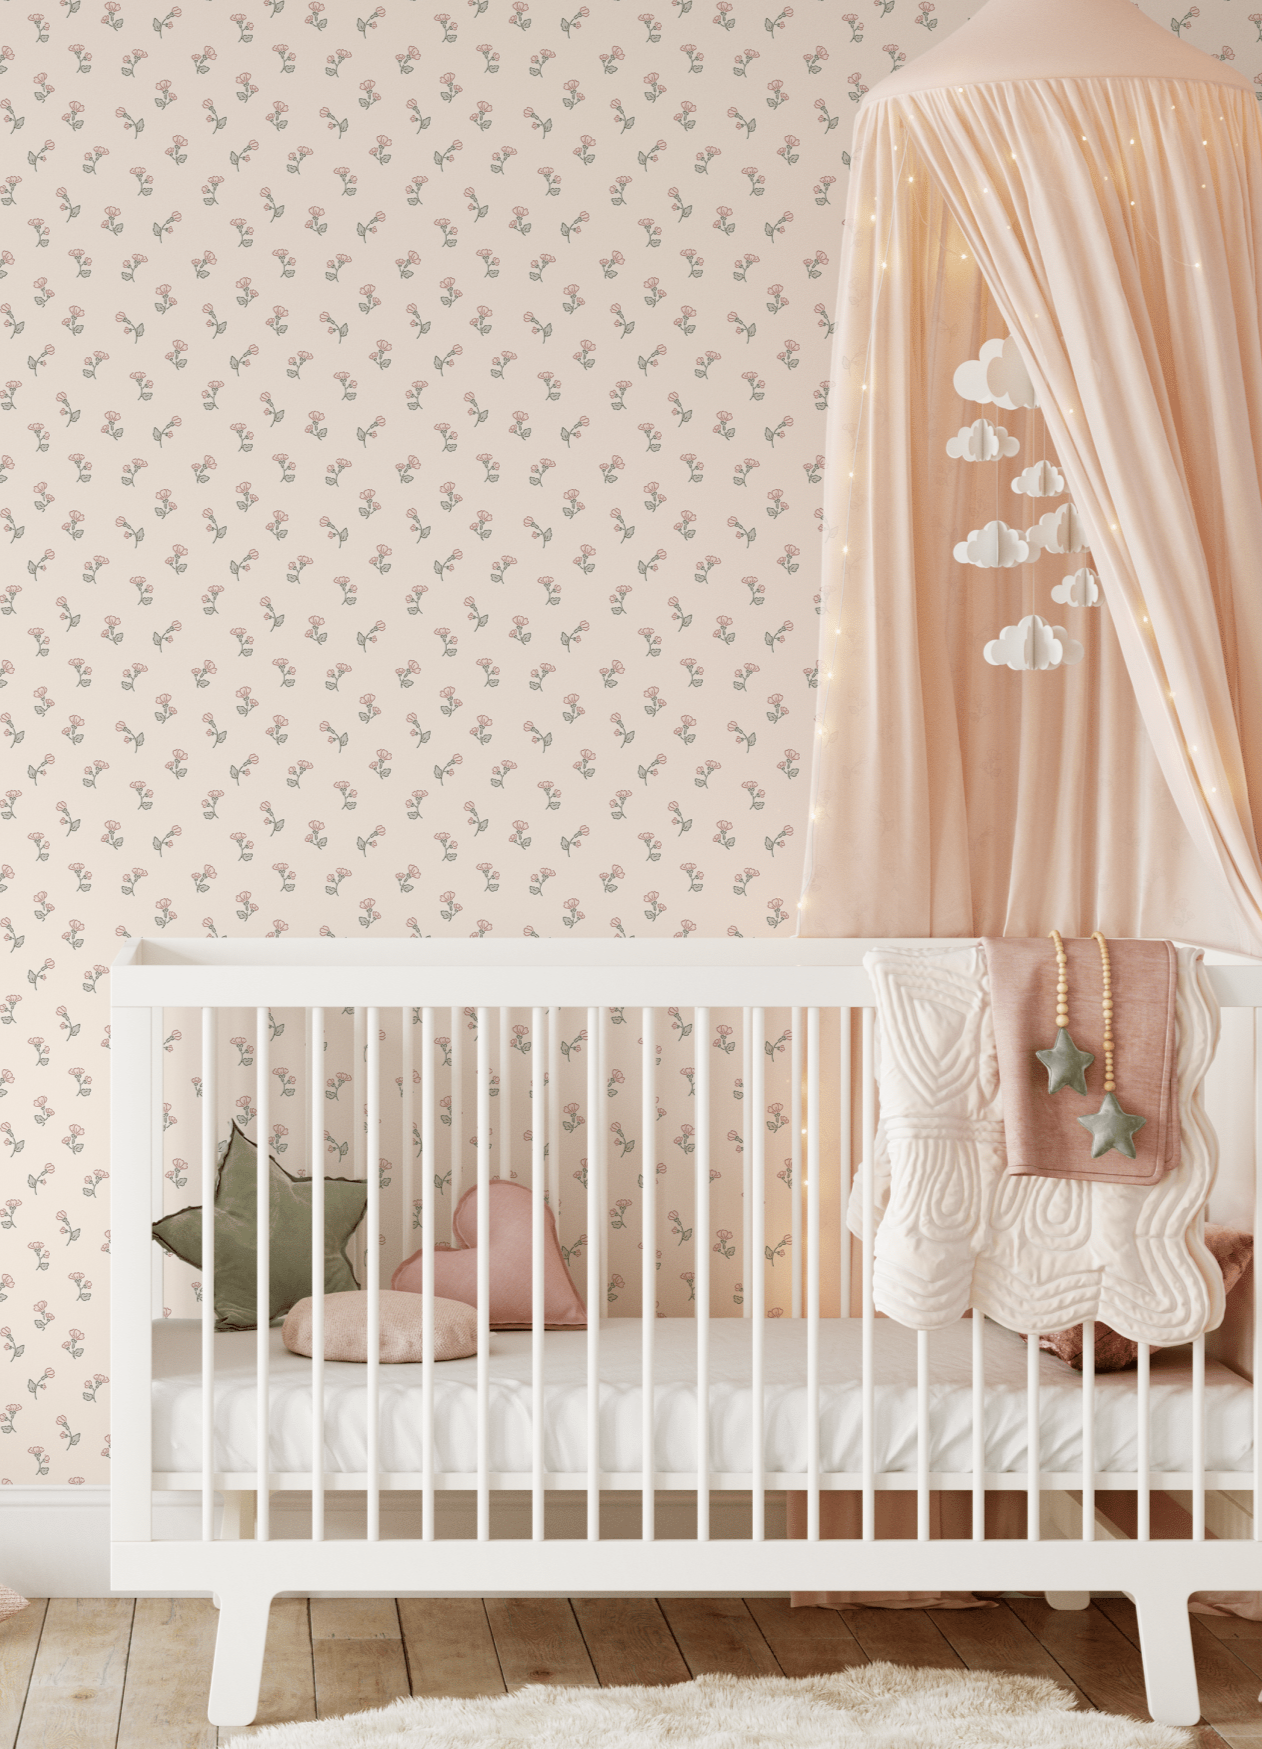 Nursery adorned with floral wallpaper, crib, canopy, and soft furnishings.